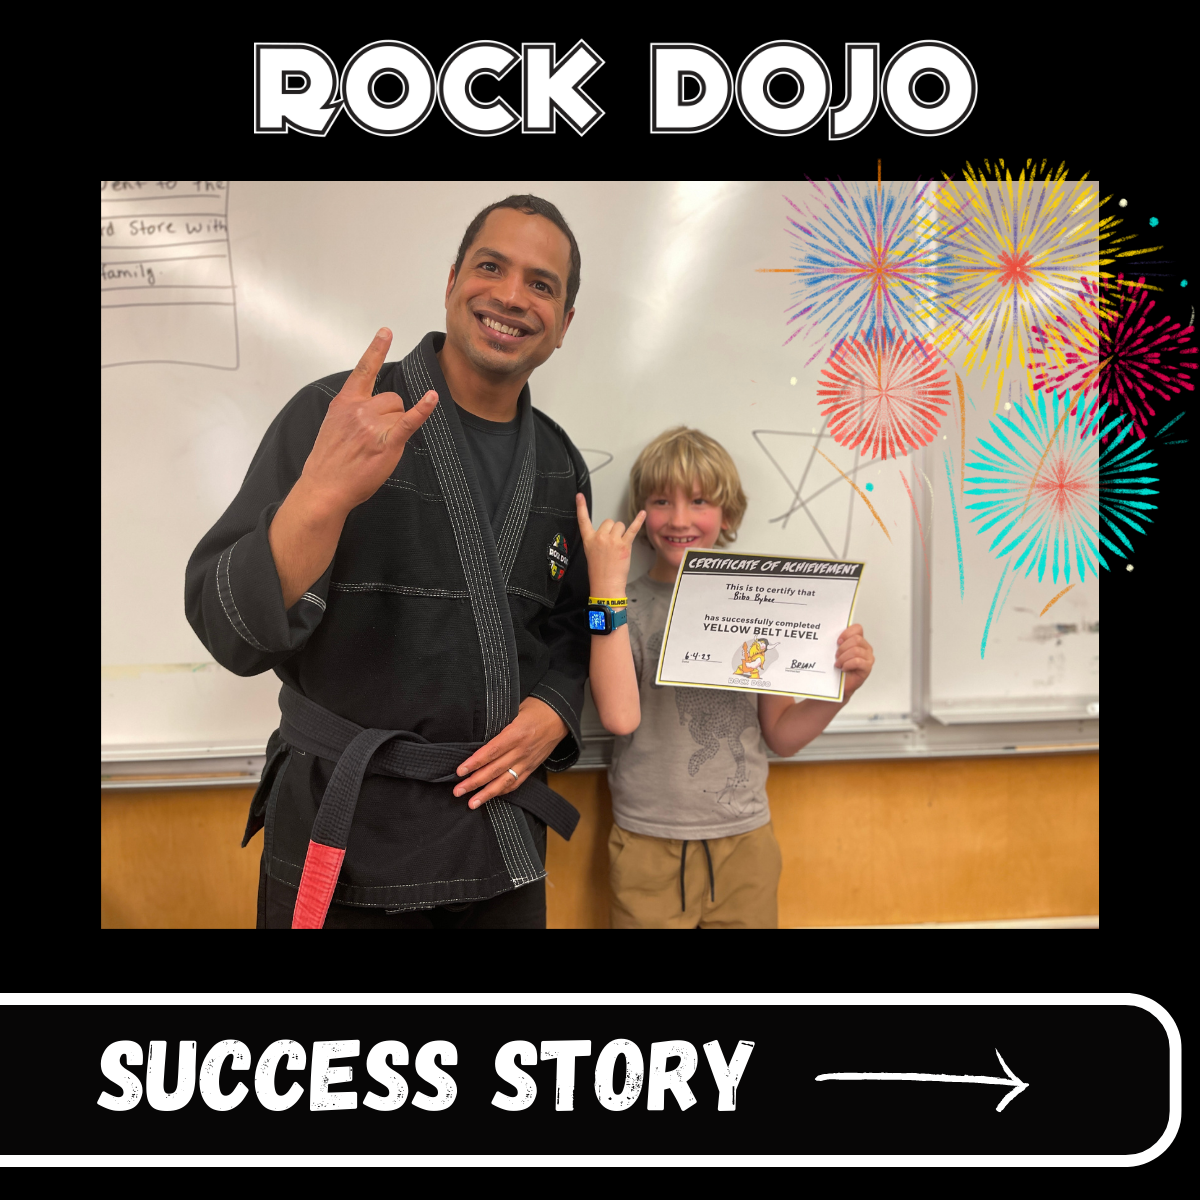 Rock Dojo Guitar Lessons - Instructor and Bibo holding certificate of completion